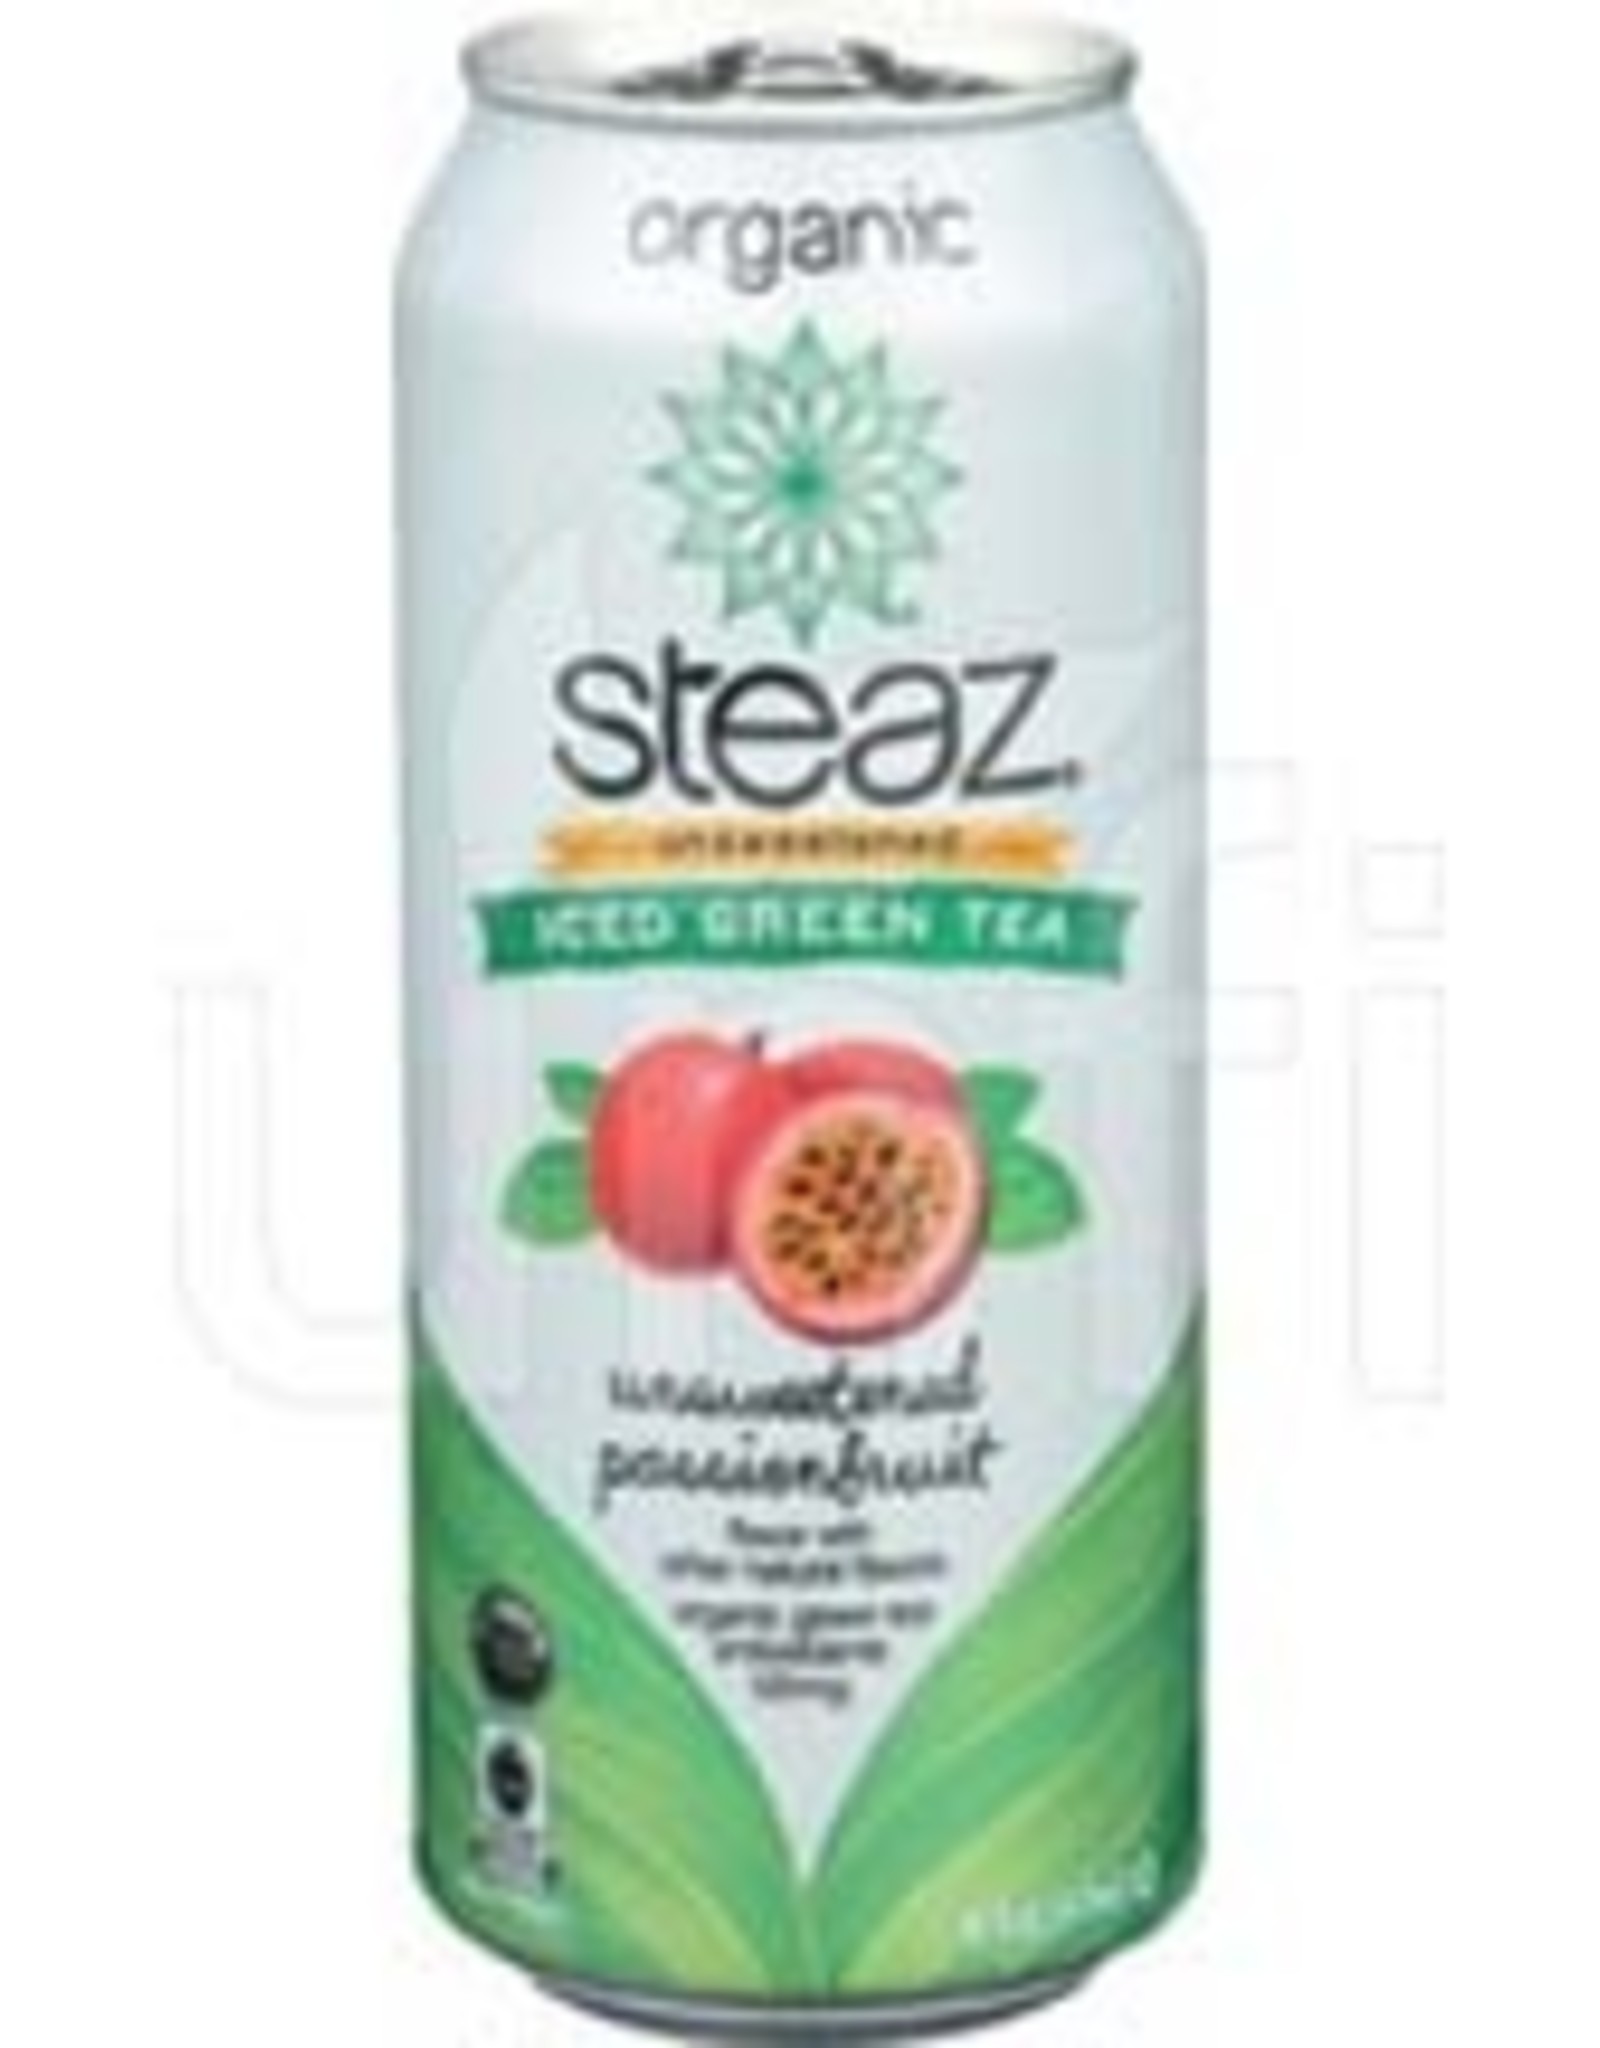 STEAZ Organic Iced Green Tea; Unsweetened Passionfruit 16oz